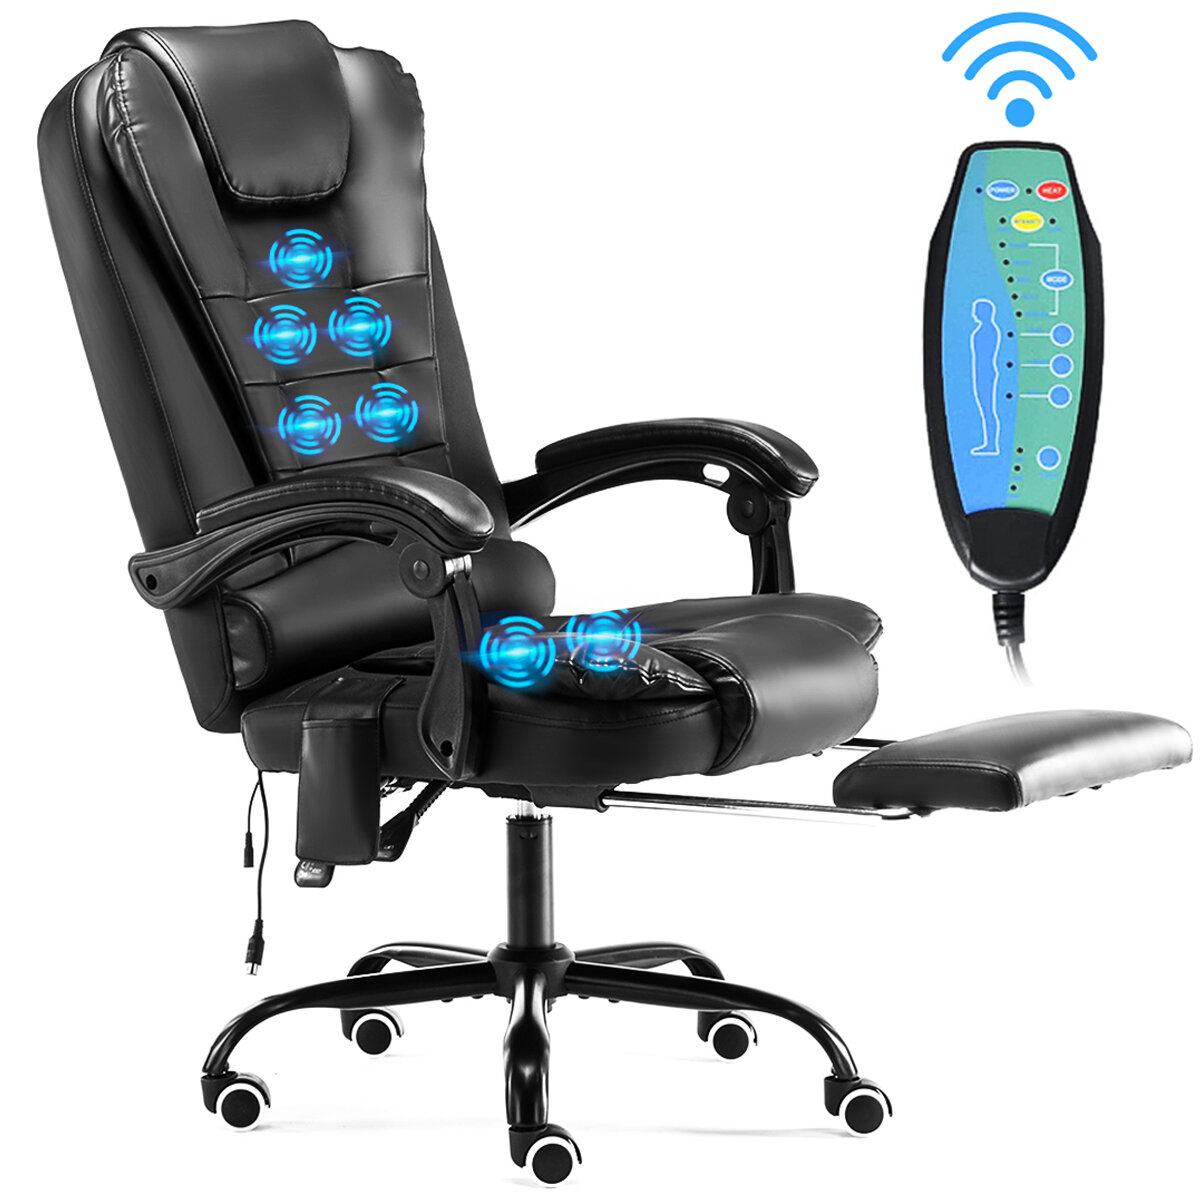 HOFFREE Ergonomic Massage Office Chair Soft PU Leather Executive Office Chair High Back with Adjustable Lumbar Support and Footrest for Home Office